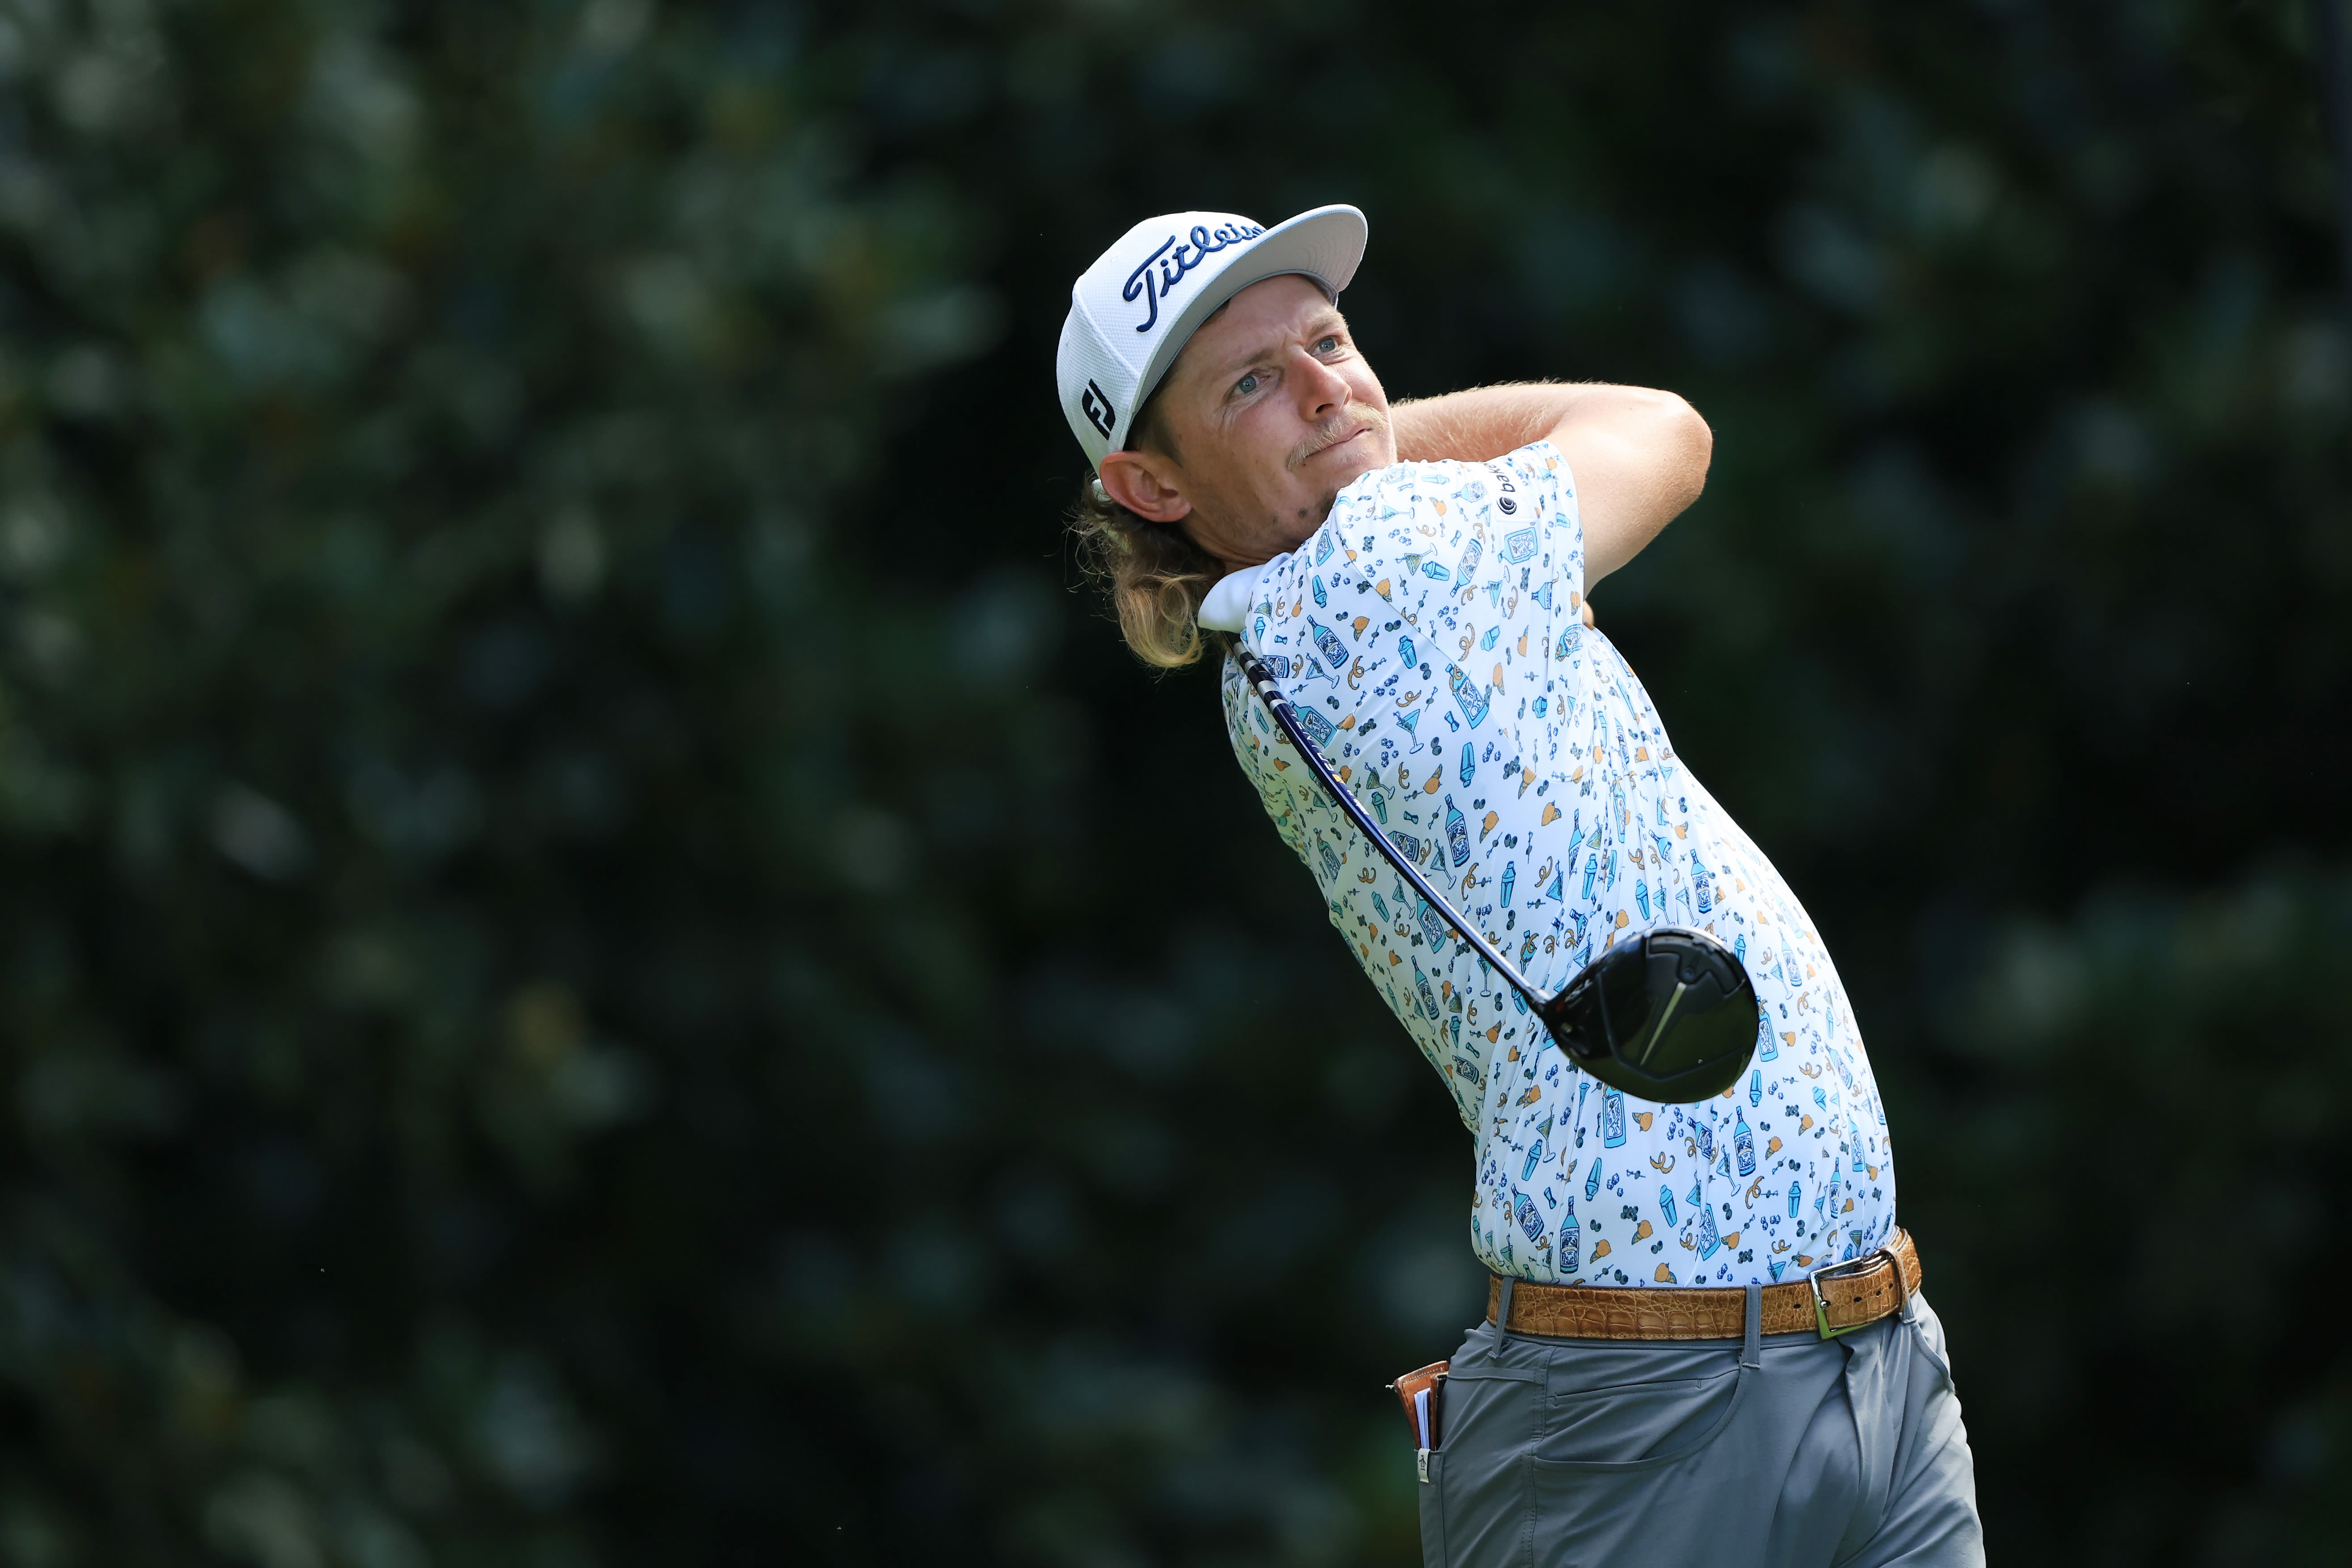 Cameron Smith of Australia plays his shot from the 17th tee during the second round of the TOUR Championship at East Lake Golf Club on August 26, 2022 in Atlanta, Georgia. (Photo by Sam Greenwood/Getty Images)